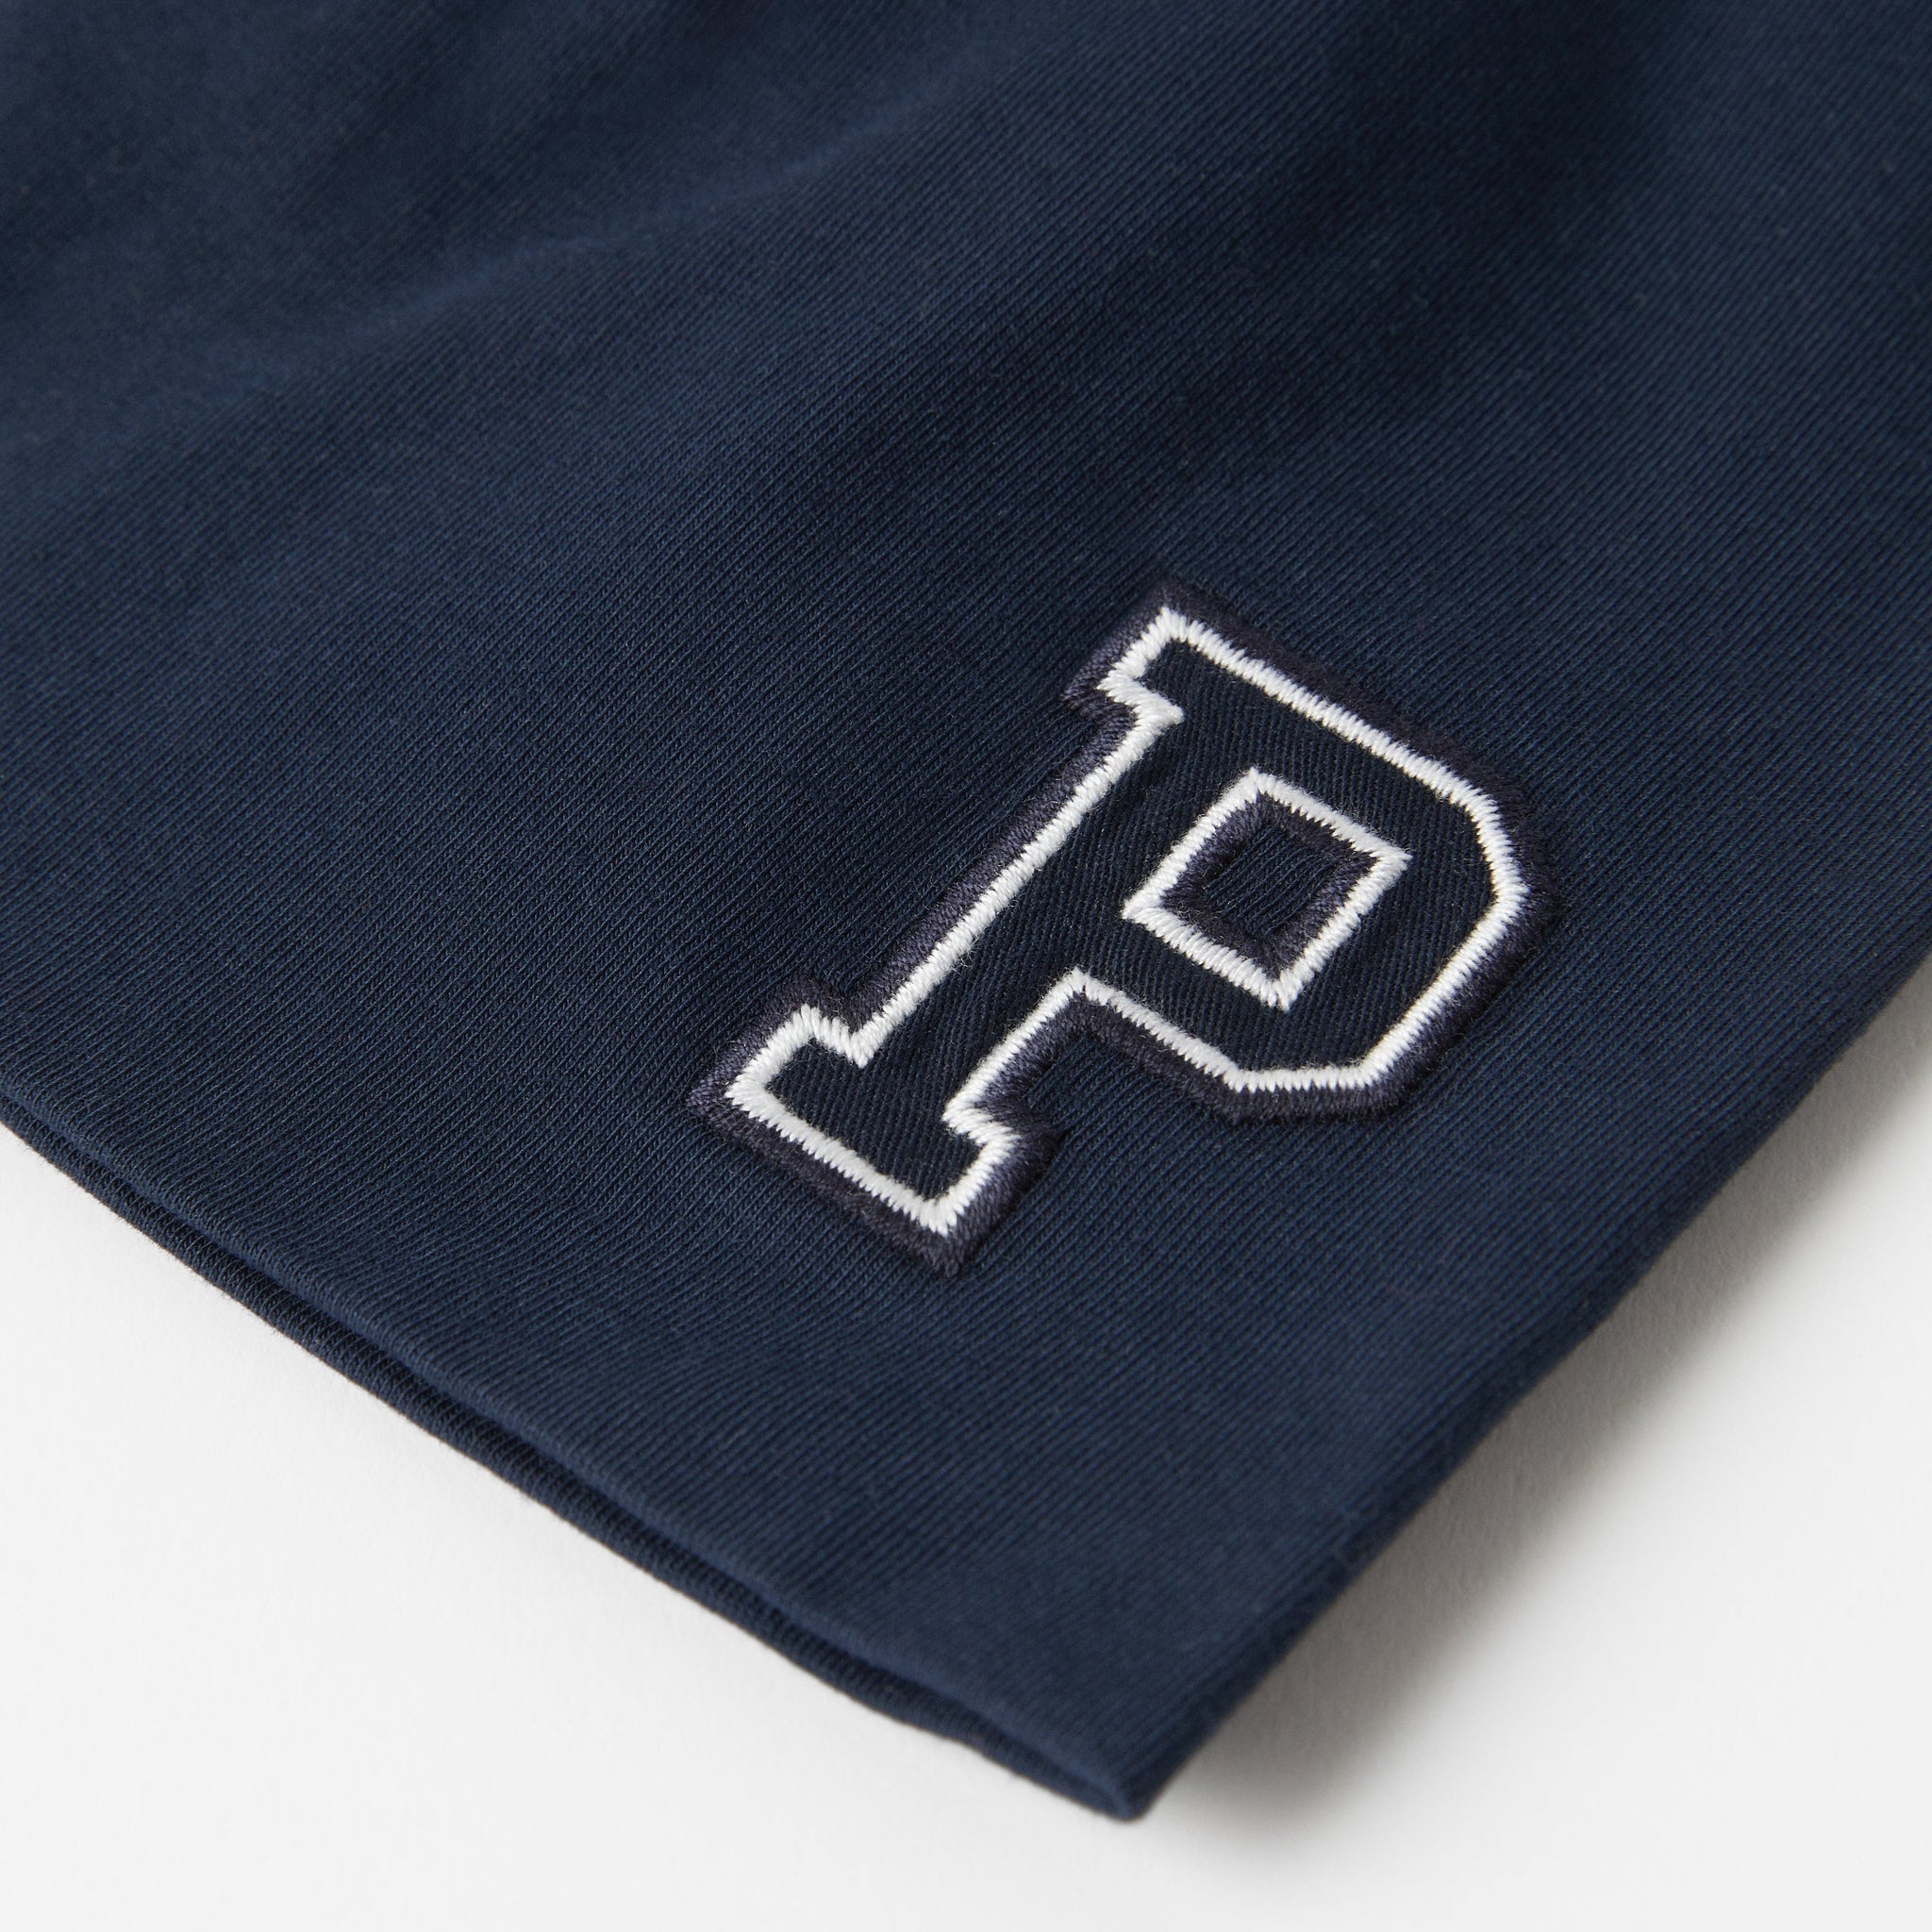 Organic Cotton Navy Kids Beanie from the Polarn O. Pyret kidswear collection. Made from sustainable sources.